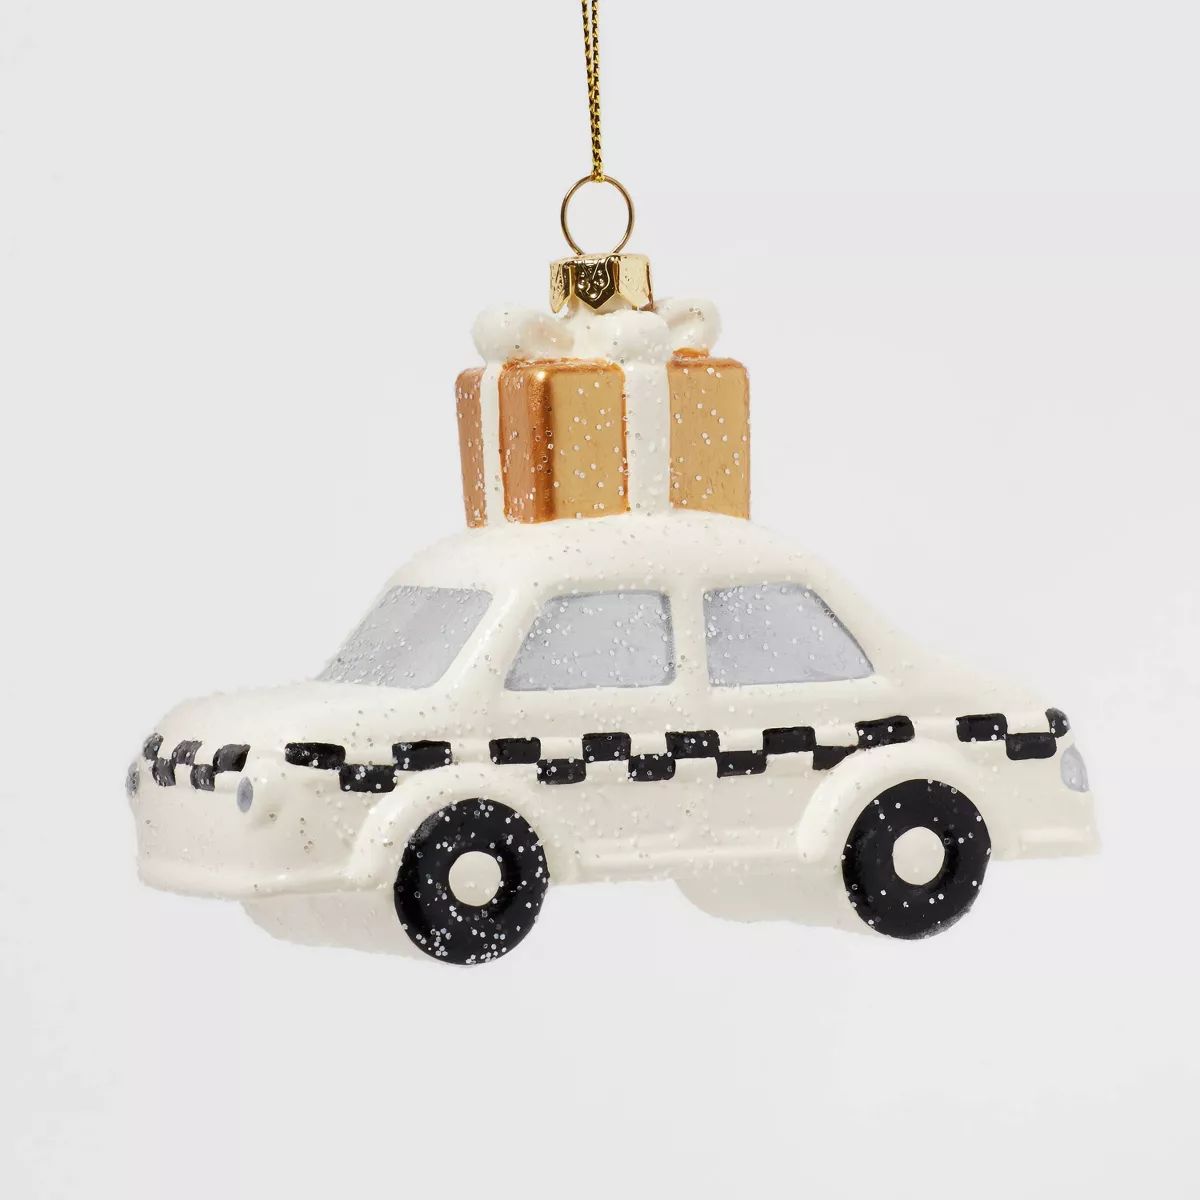 Taxi Carrying Gift Christmas Tree Ornament White - Wondershop™ | Target